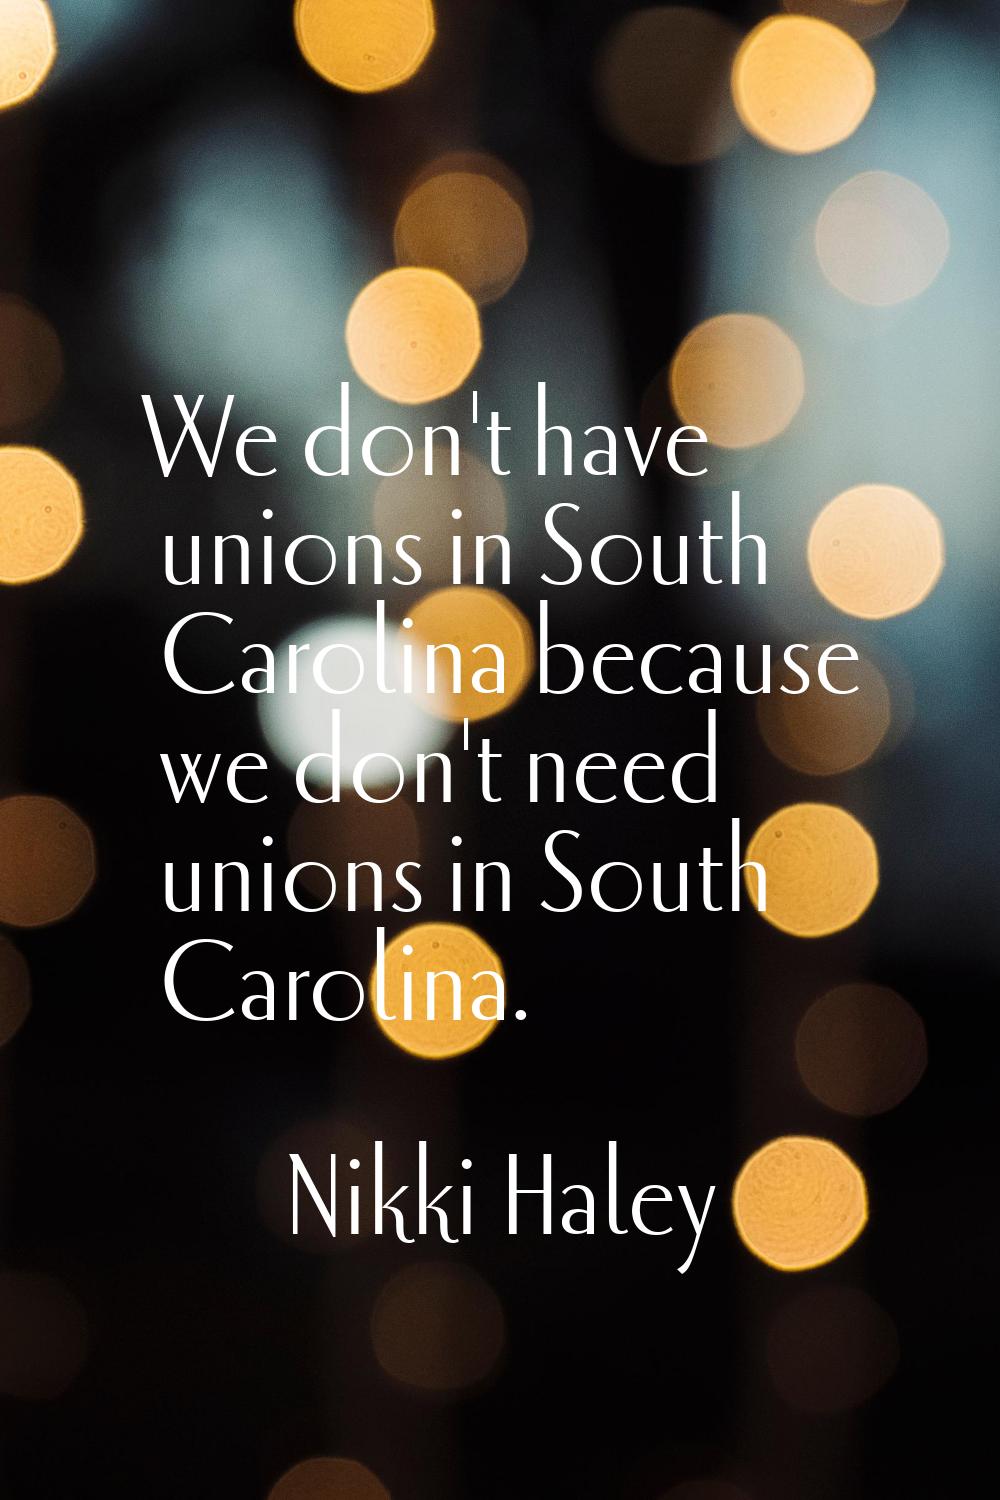 We don't have unions in South Carolina because we don't need unions in South Carolina.